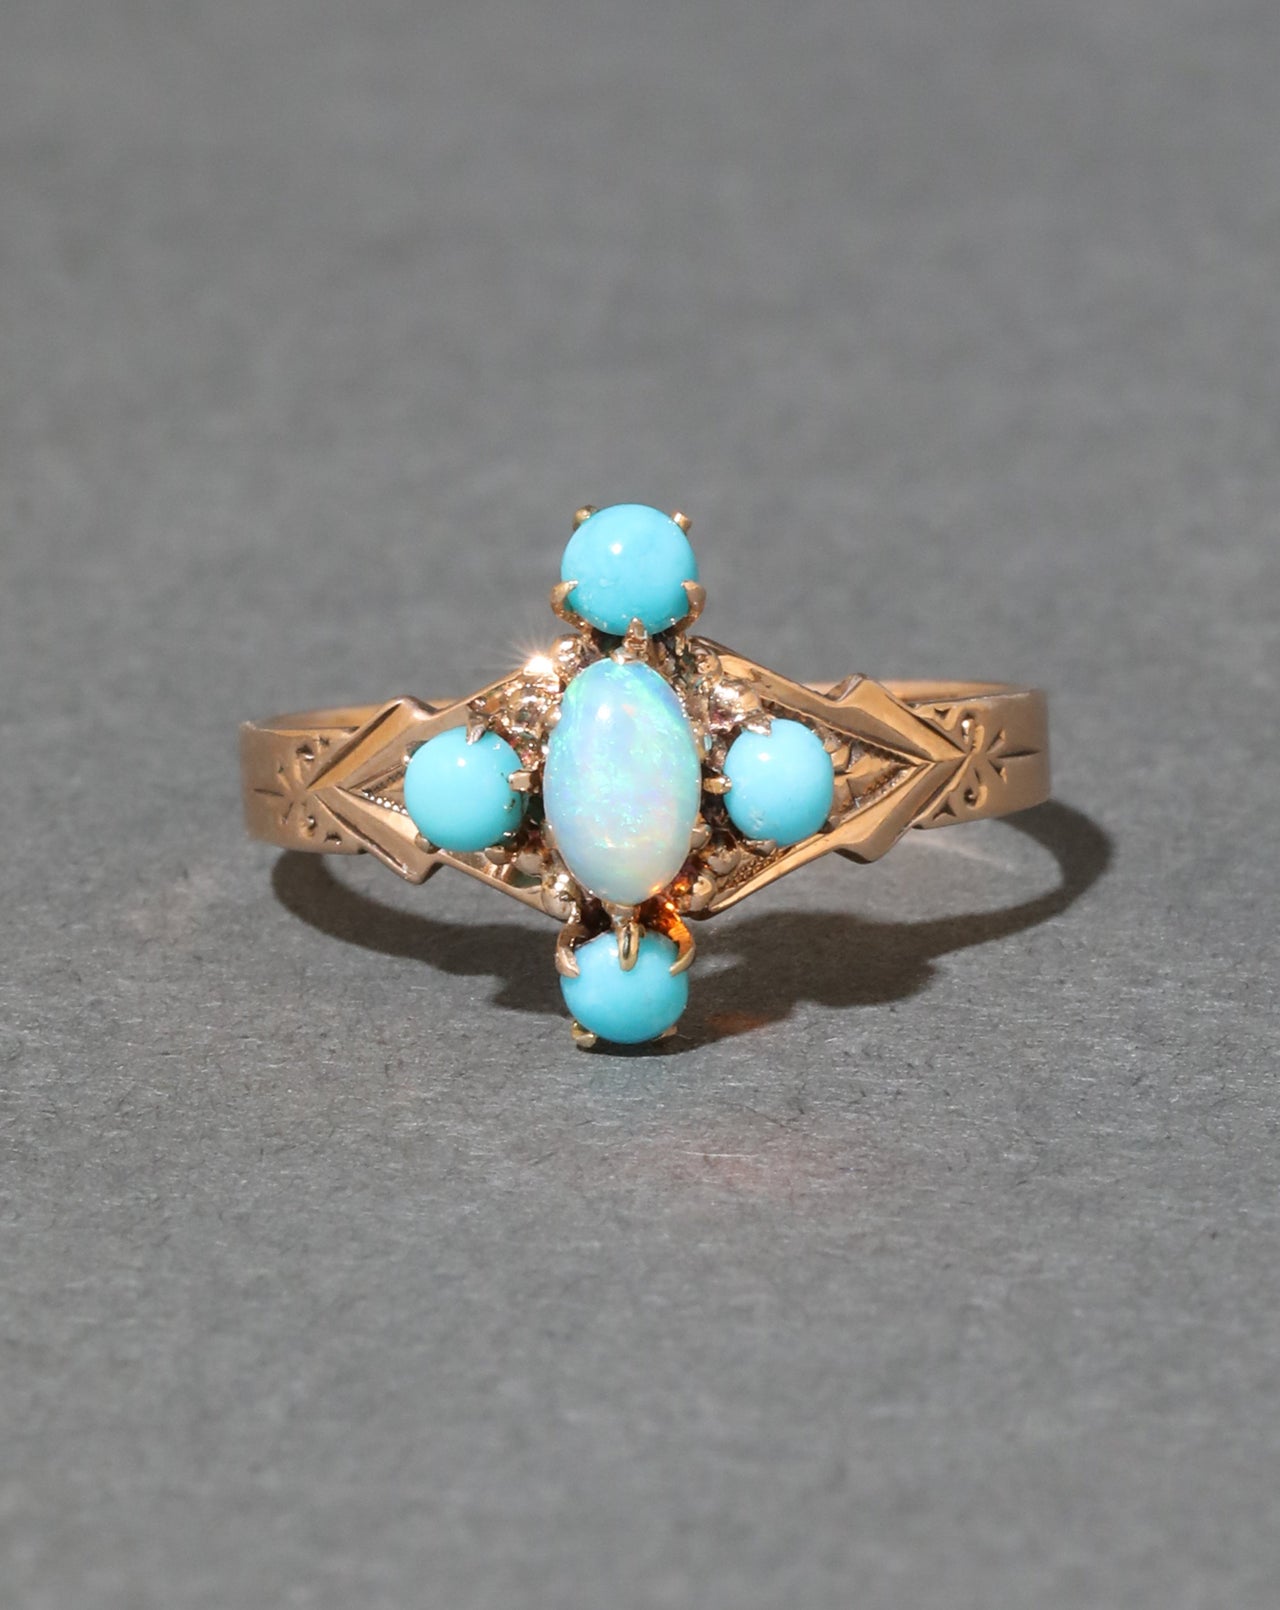 Antique Victorian Turquoise and Opal Ring in 14k Gold and Sterling Silver - Photo 2